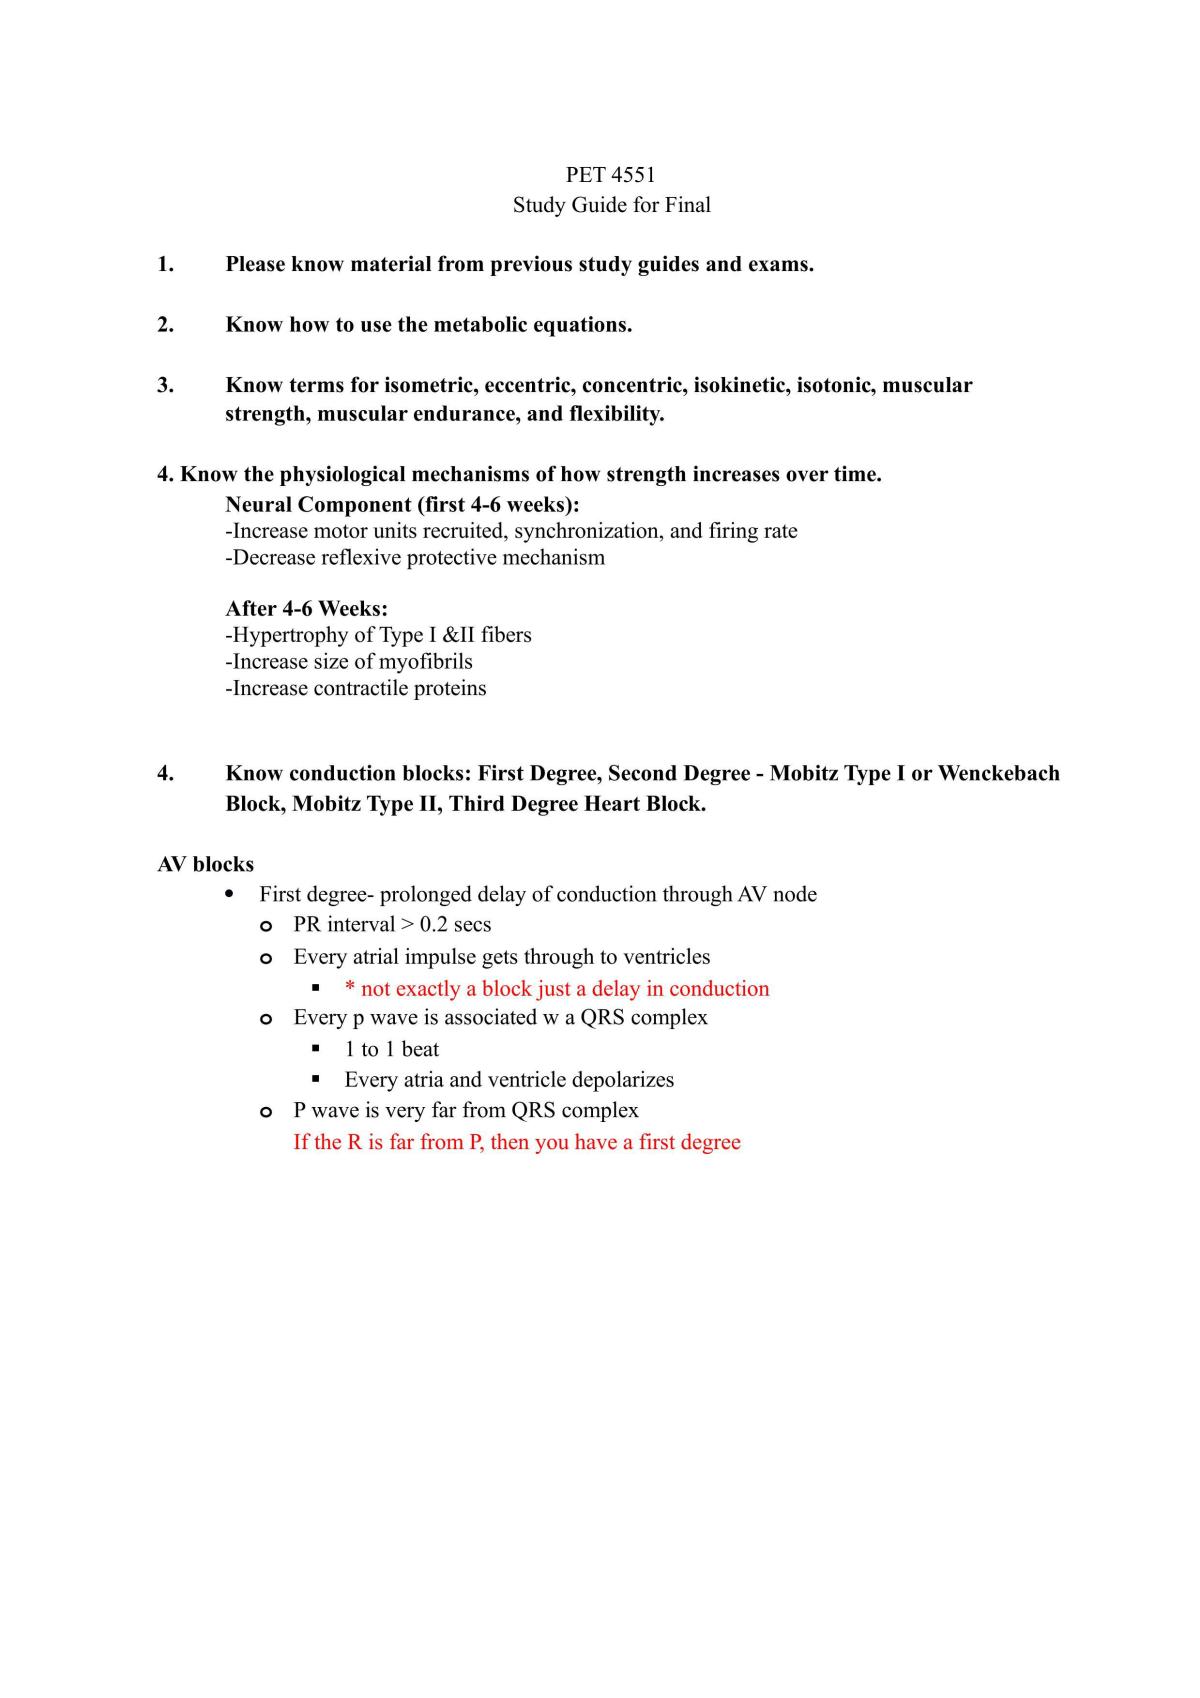 Exercise Testing and Prescription Study Guide for Final - Page 1